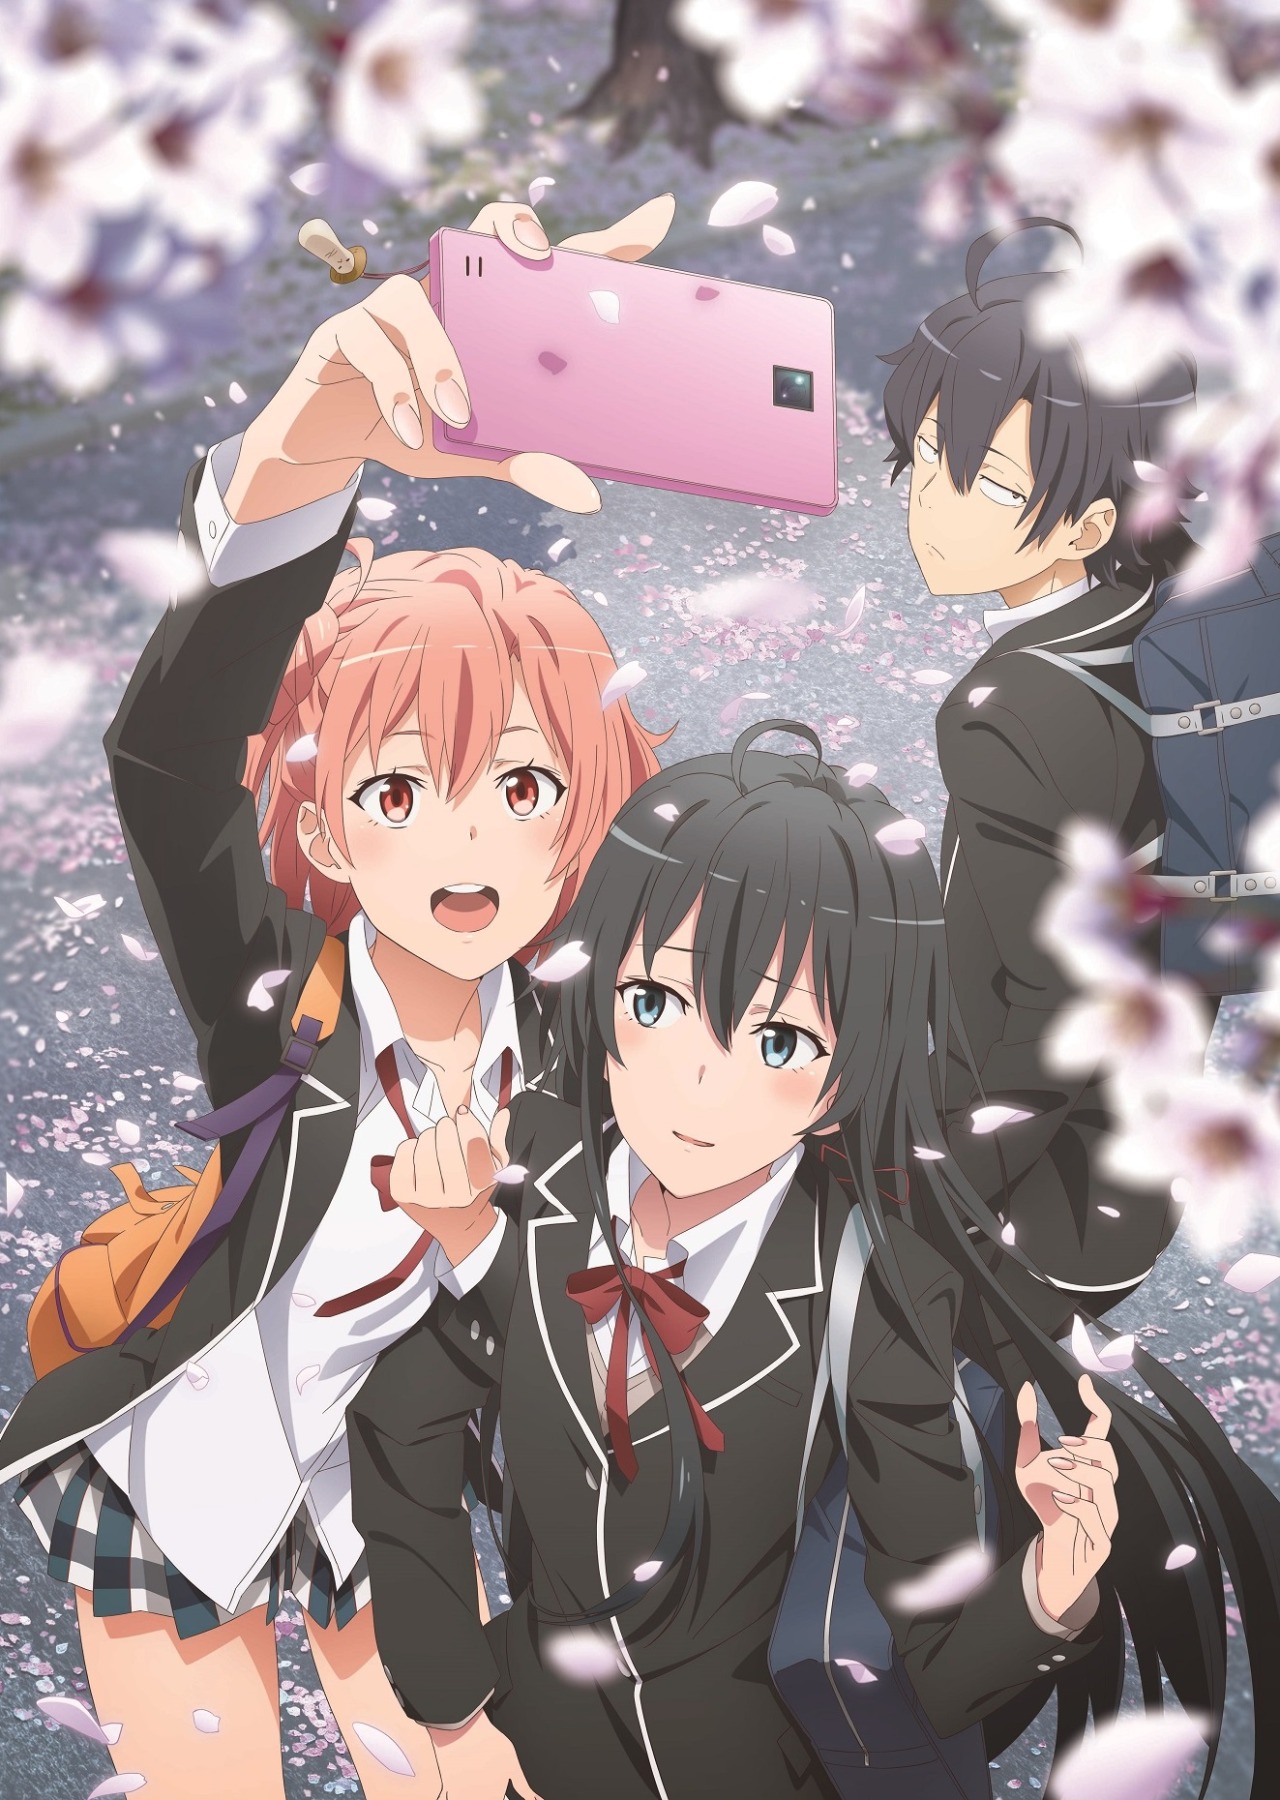 A new key visual and teaser PV for the third season of the “Oregairu” TV anime series has been released.
“Oregairu” S3, fully titled “Yahari Ore no Seishun Love Comedy wa Machigatteiru: Kan,” will consist of 12 episodes. It is slated to air in Spring...